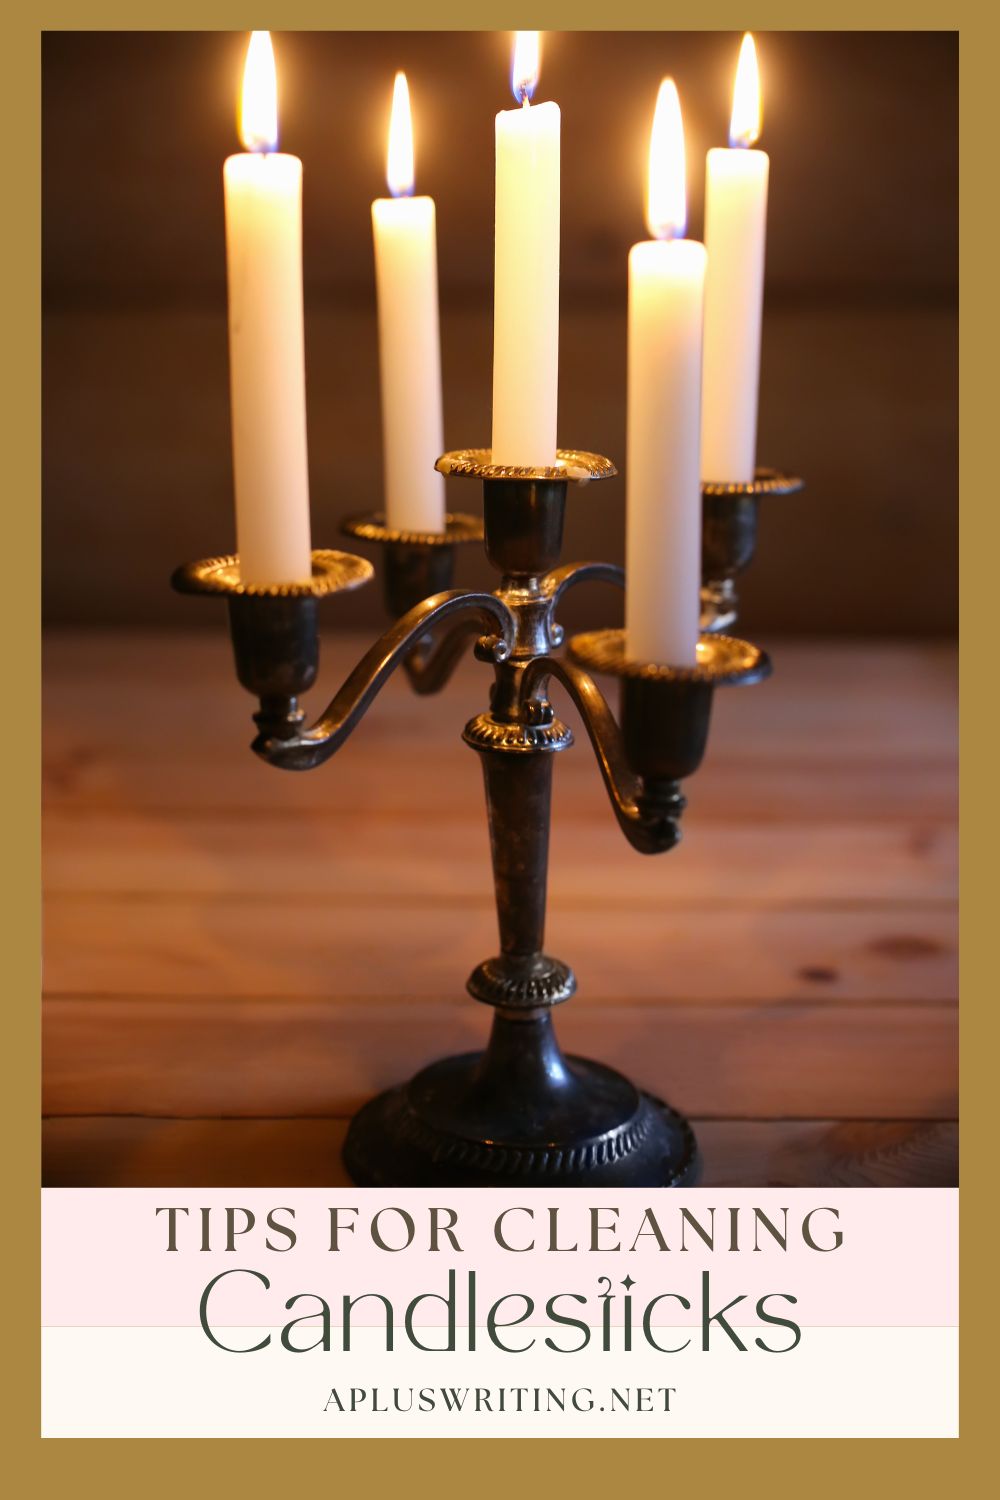 A candlestick holder with 5 lit candles 